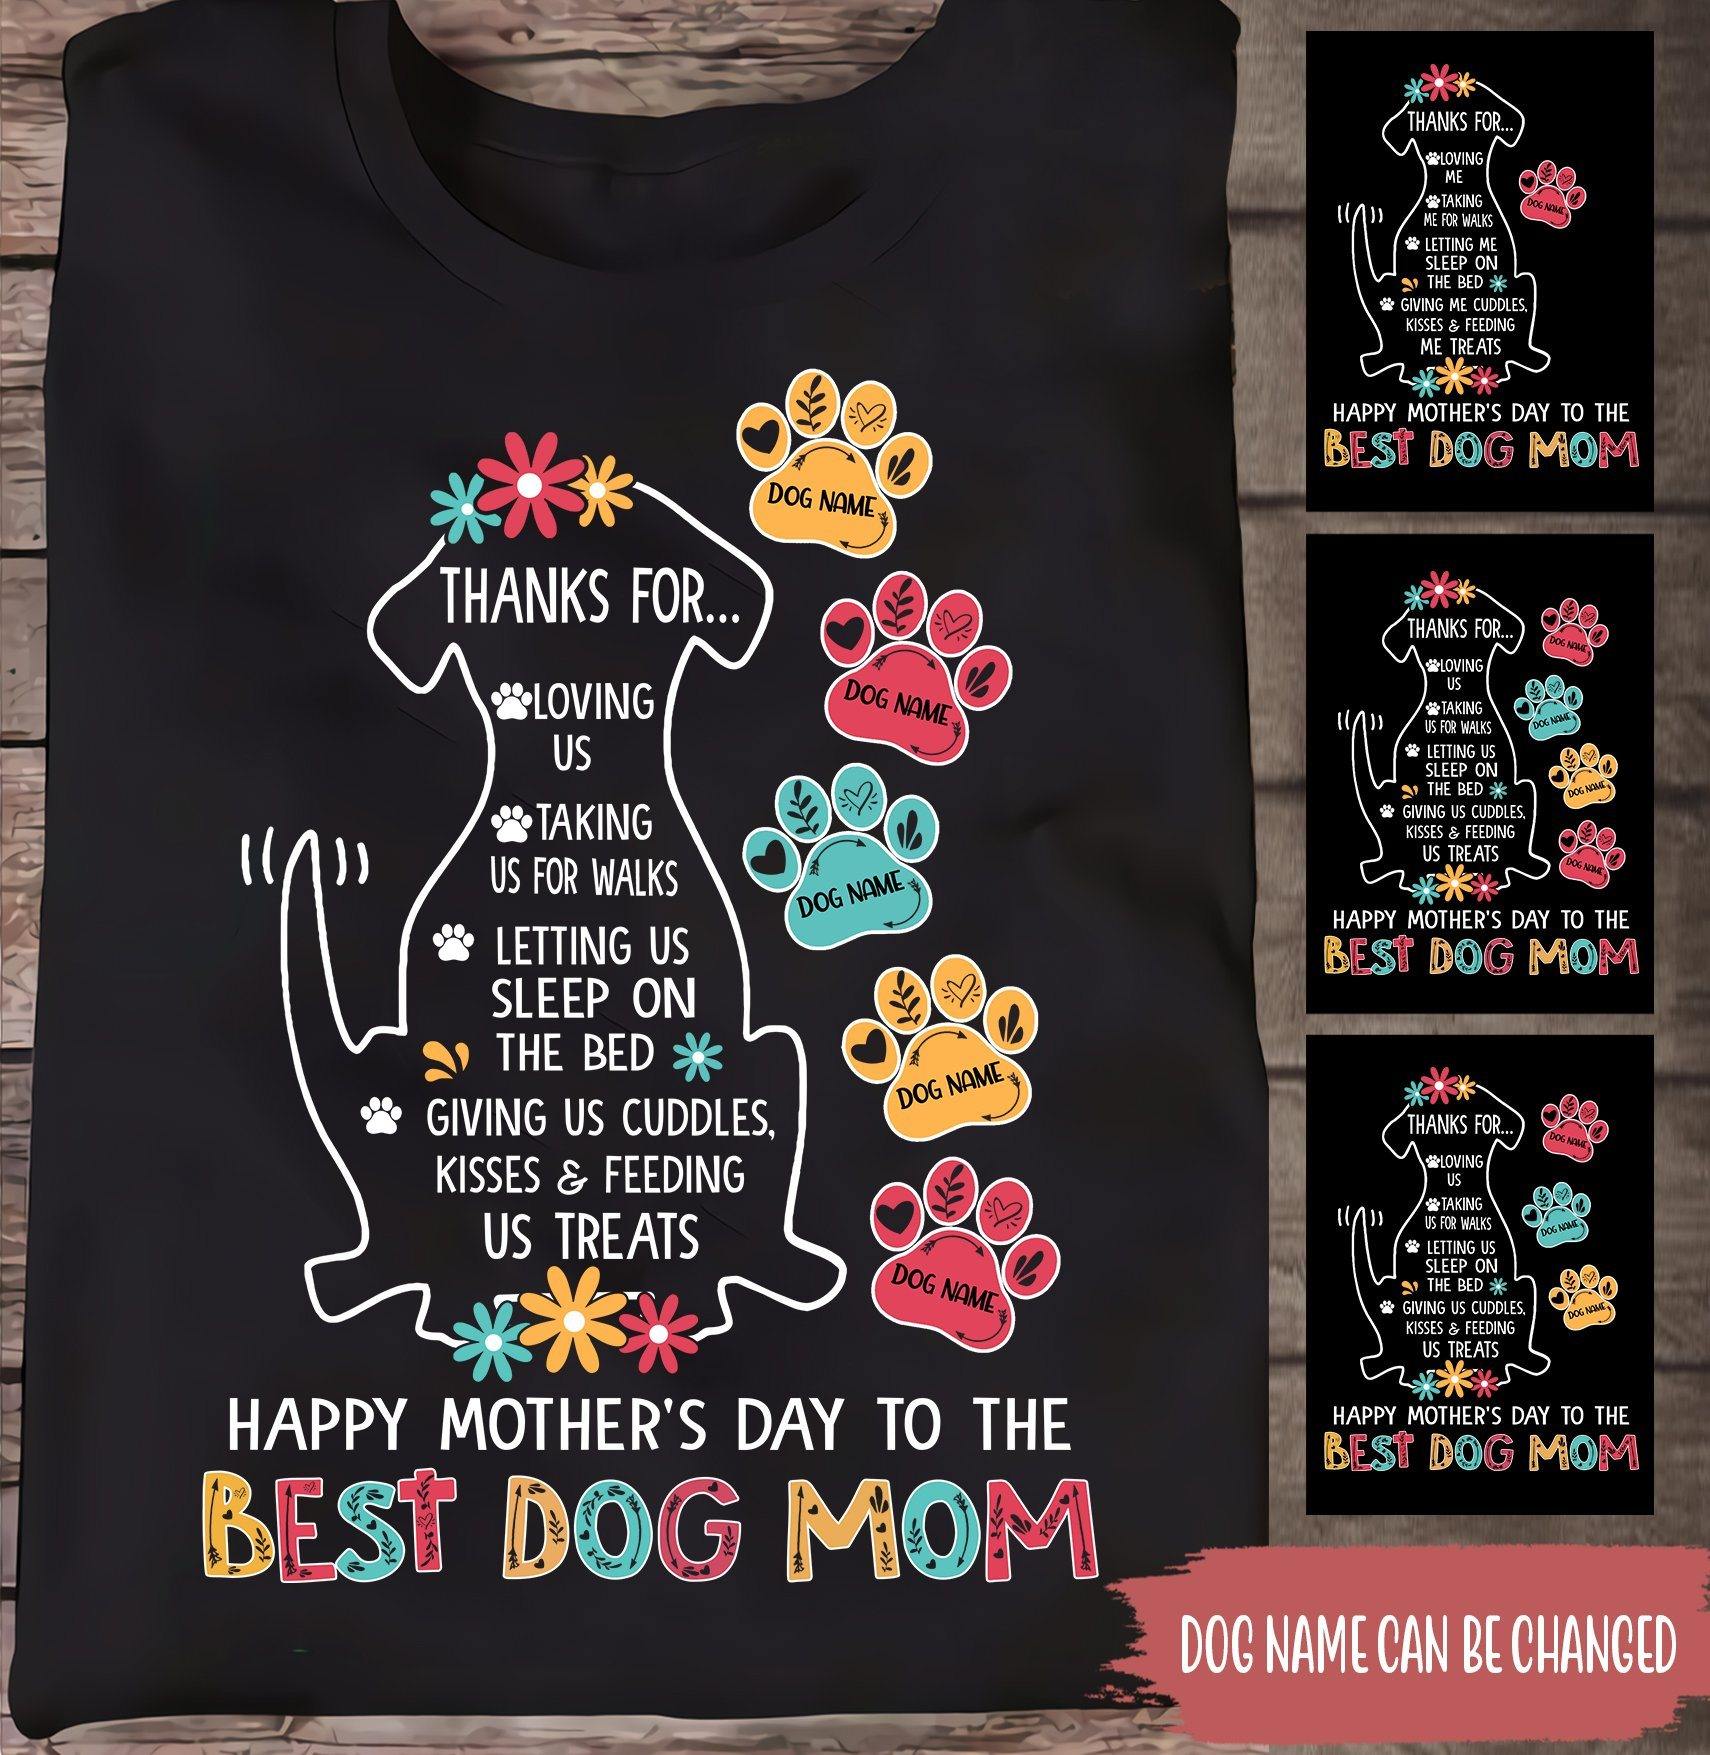 Dog Custom T Shirt Happy Mother's Day To The Best Dog Mom Personalized Gift - PERSONAL84